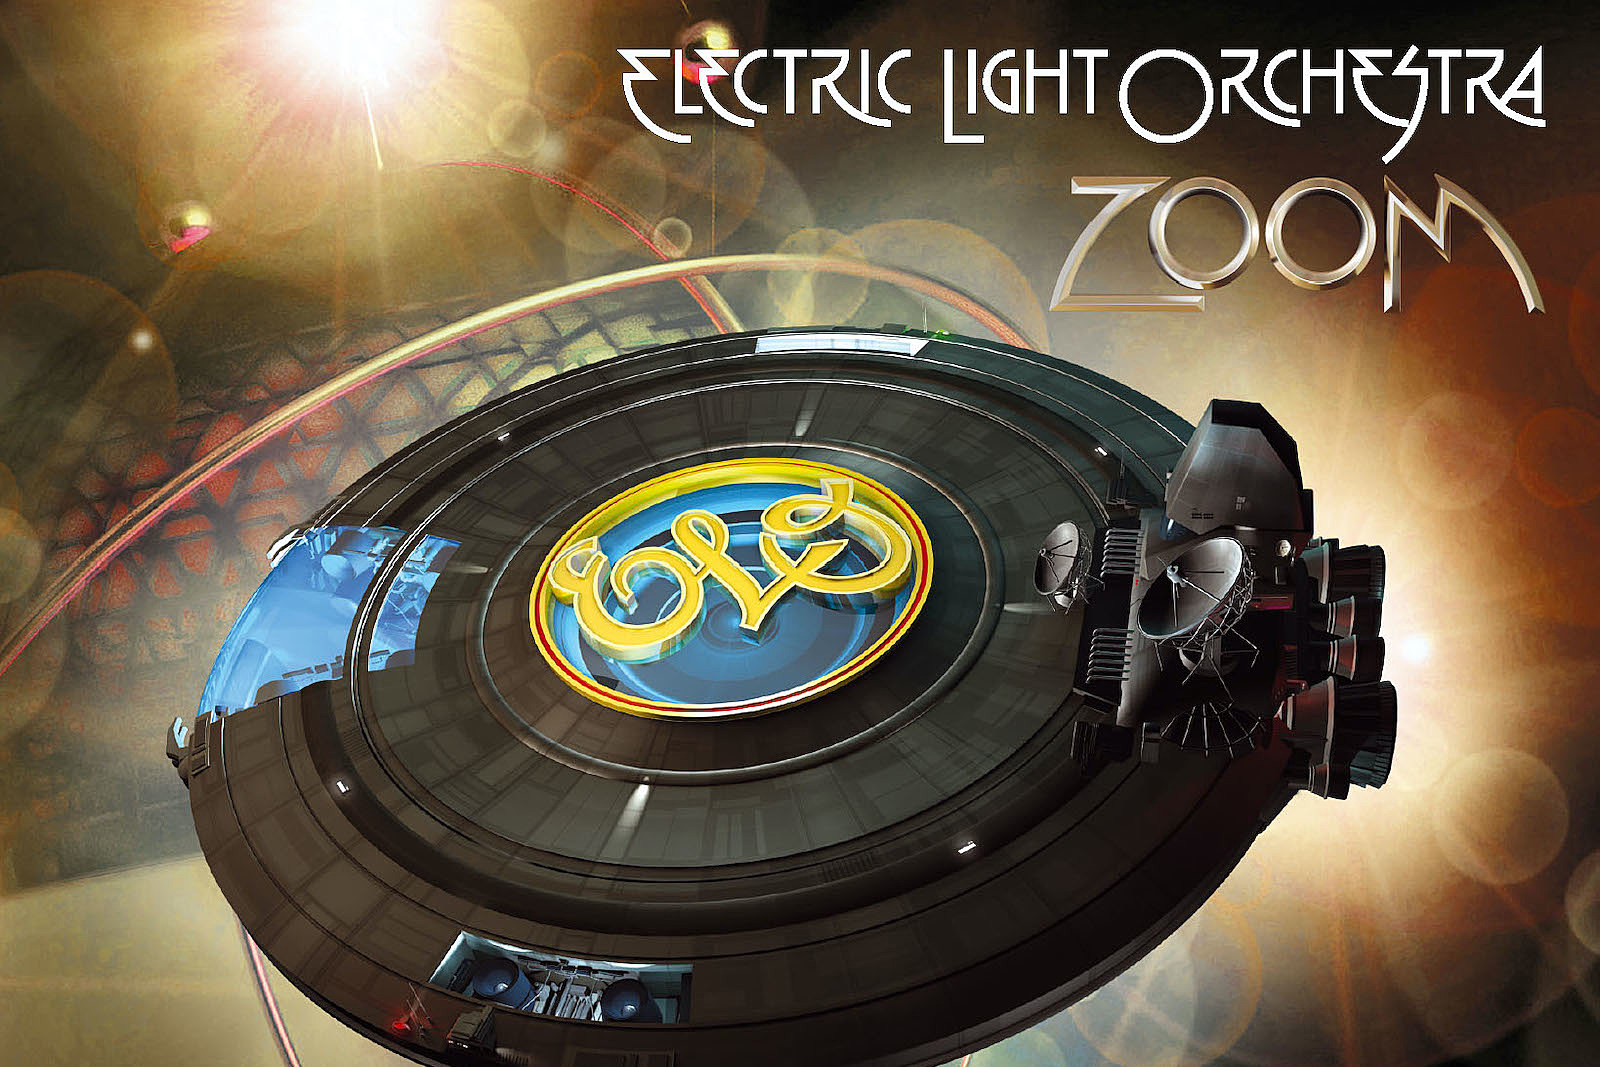 Best ELO Songs: The 10 greatest Electric Light Orchestra tunes